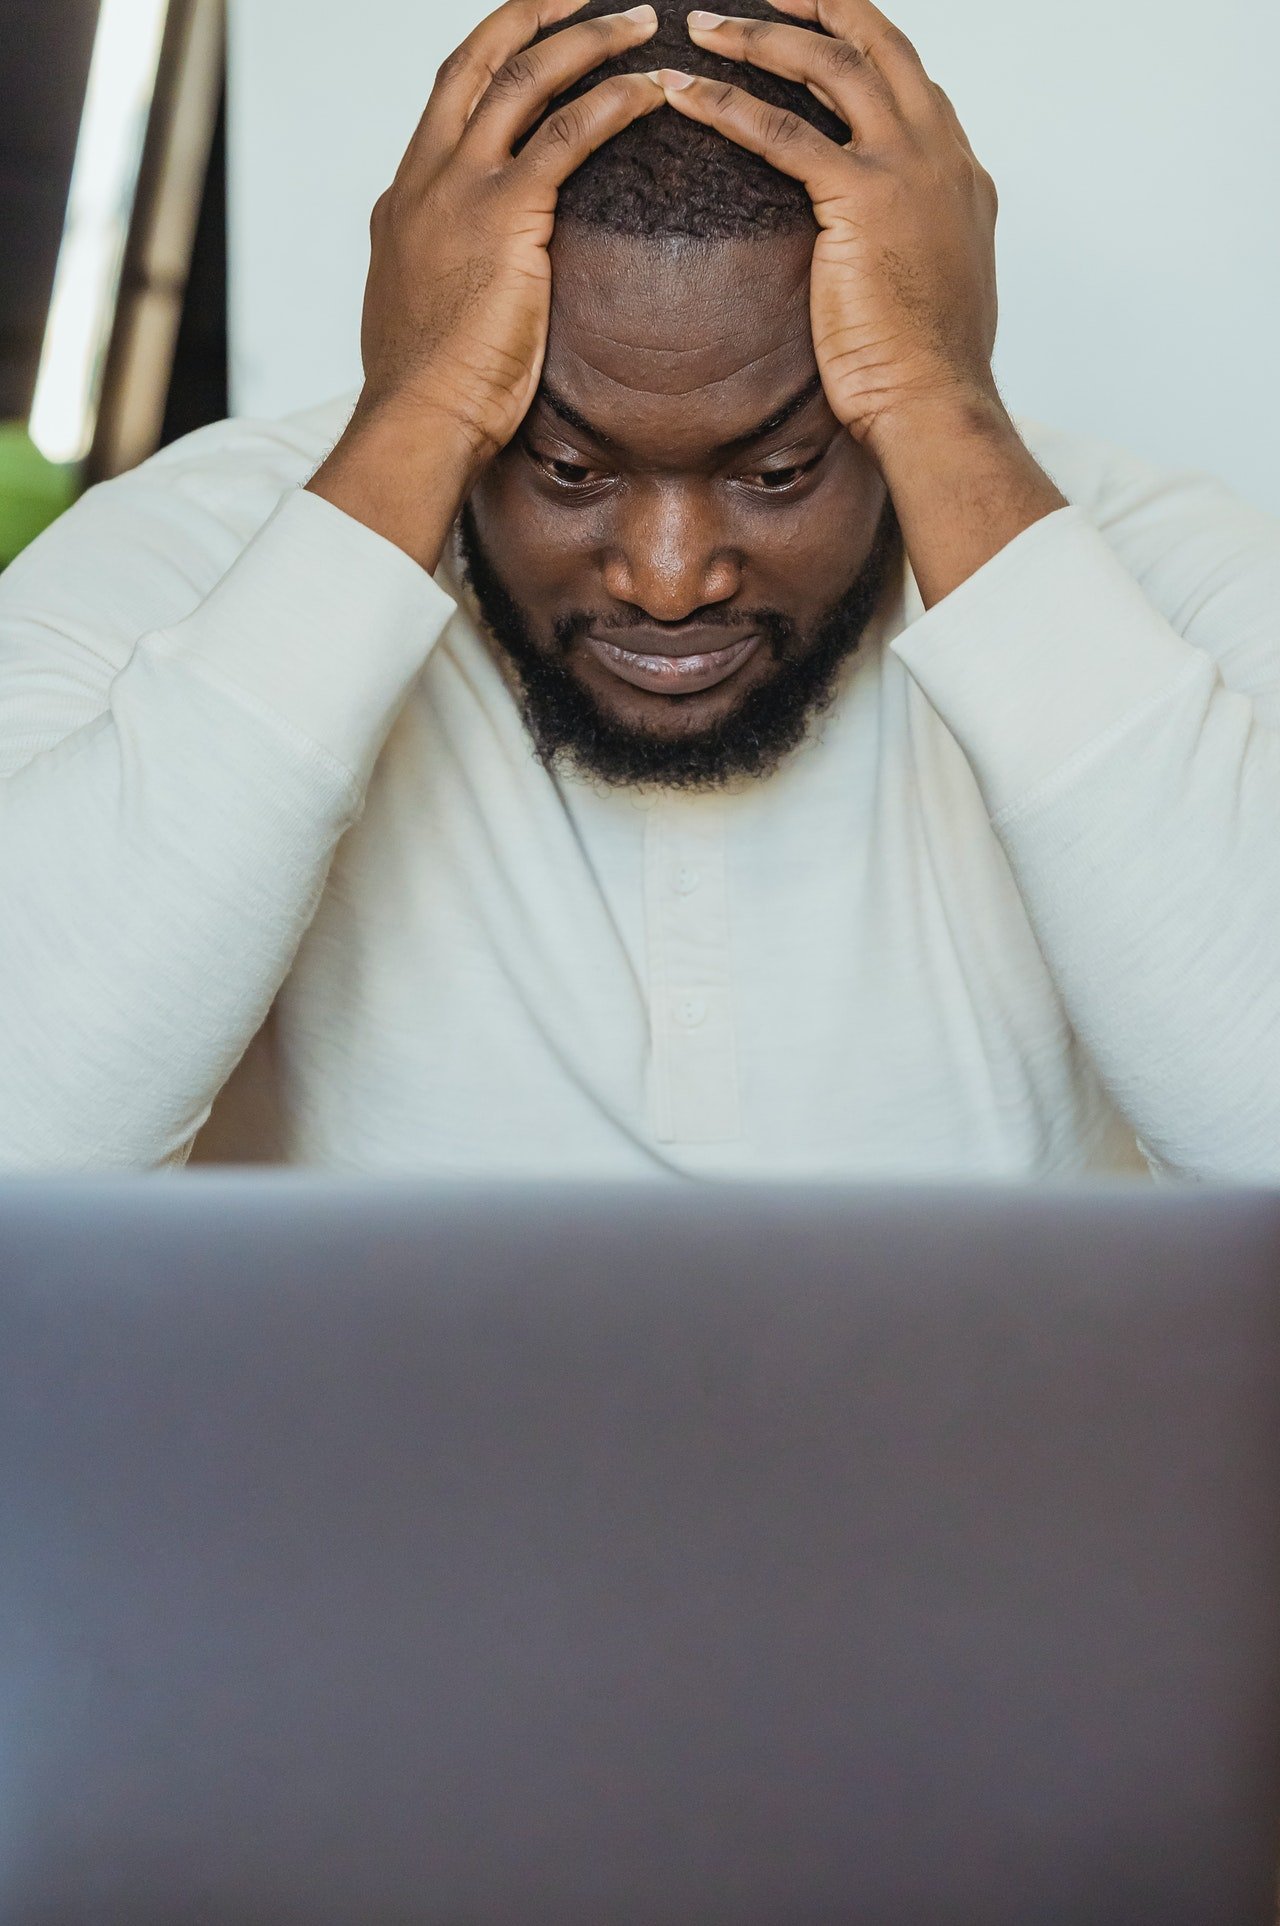 A frustrated man holding his head with both hands. | Source: Pexels